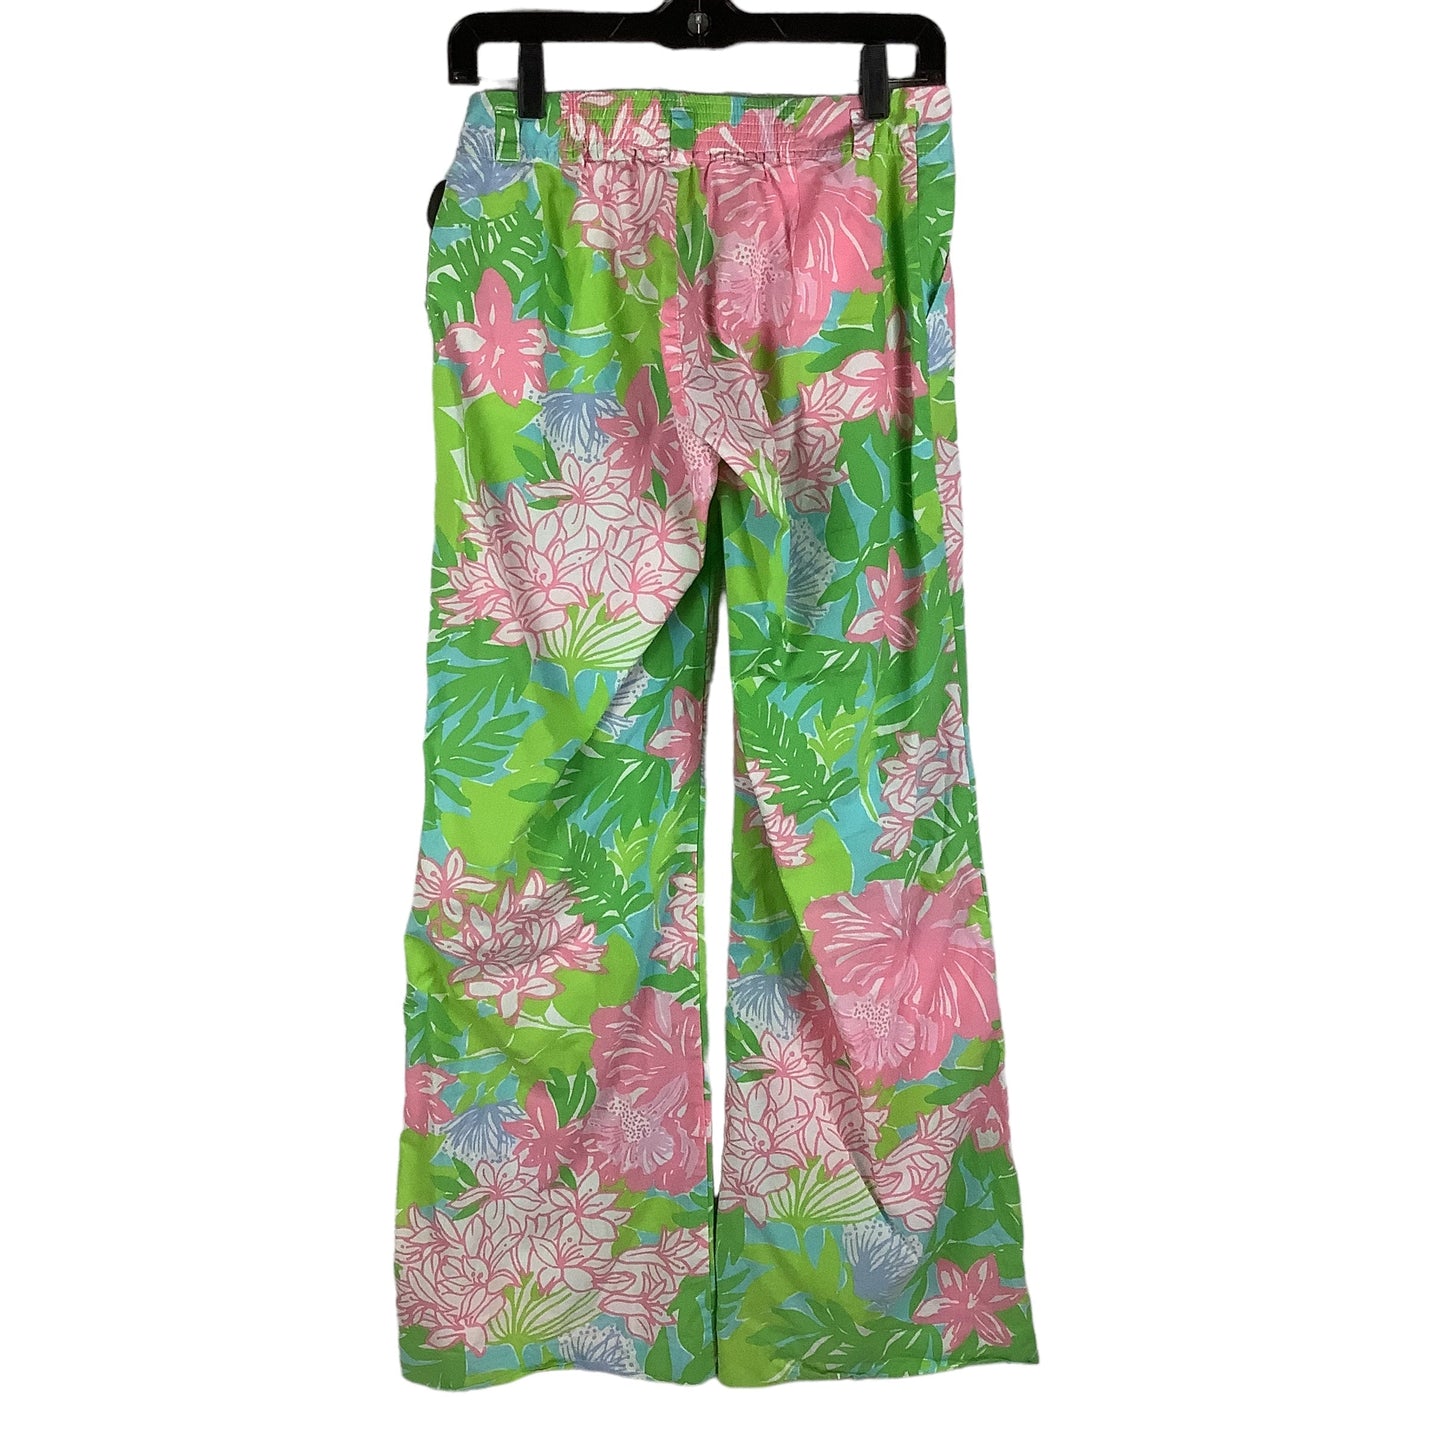 Green & Pink Pants Designer Lilly Pulitzer, Size 2